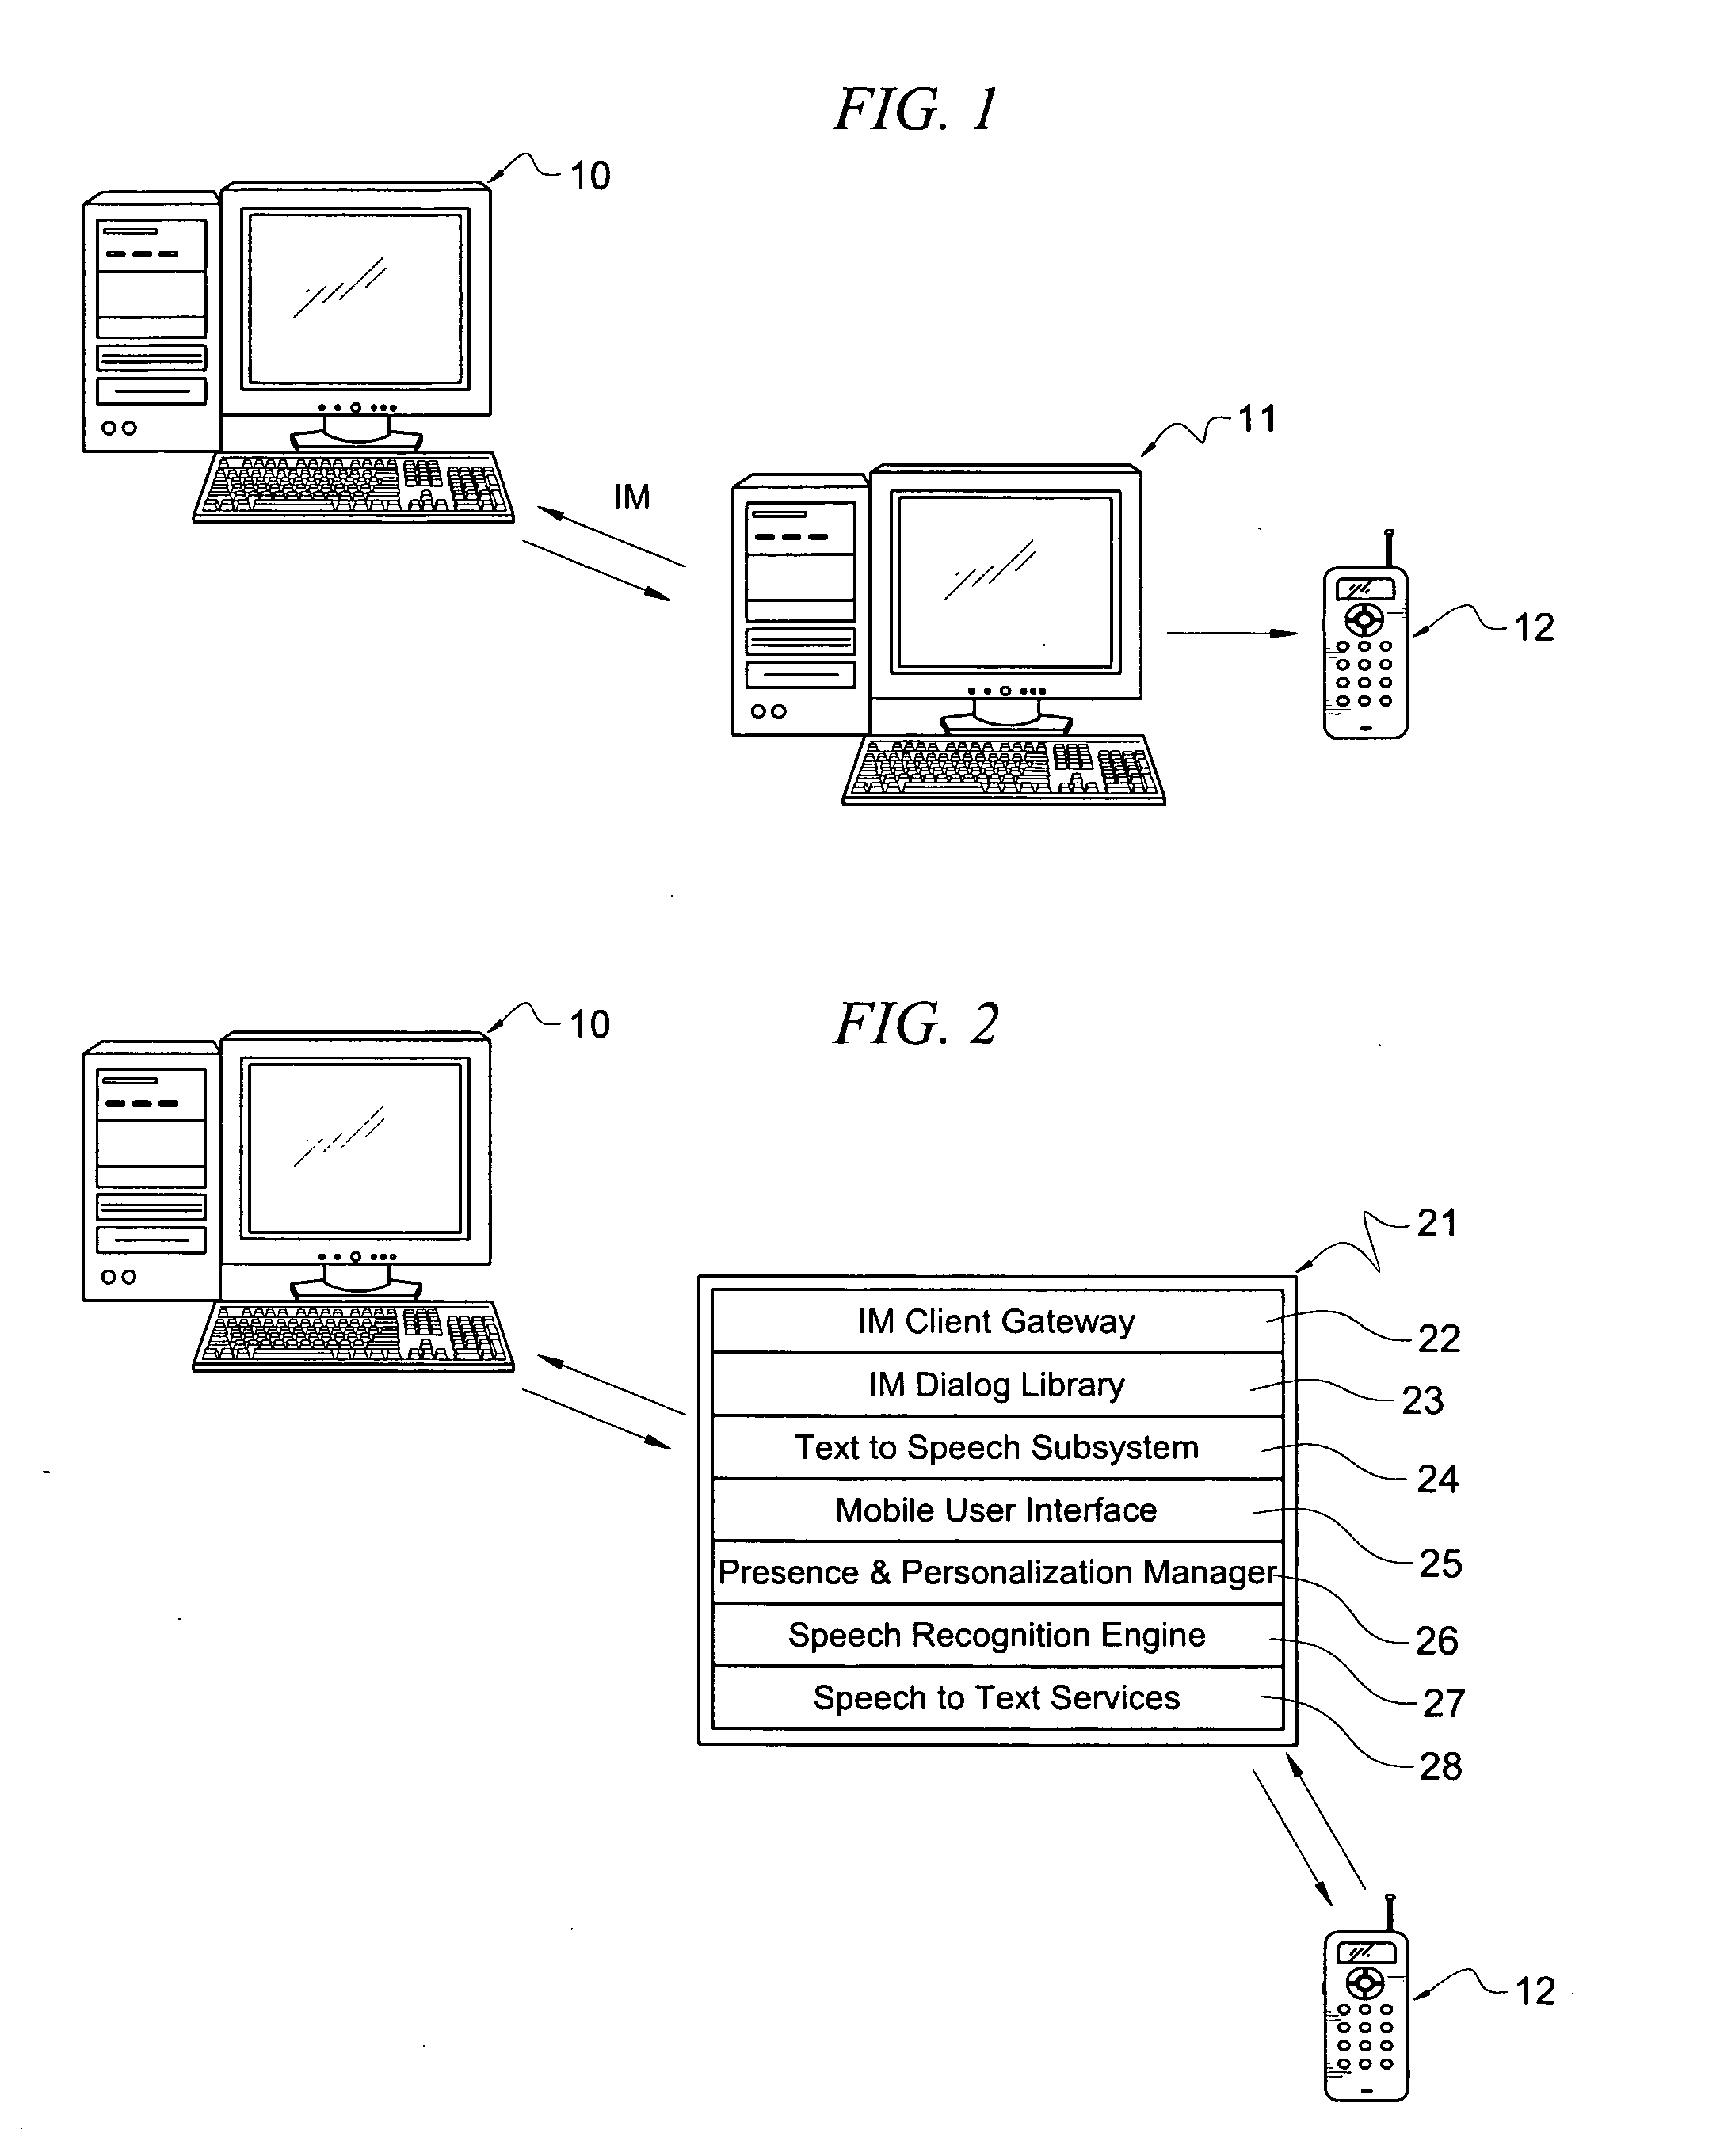 System and method for voice-enabled instant messaging